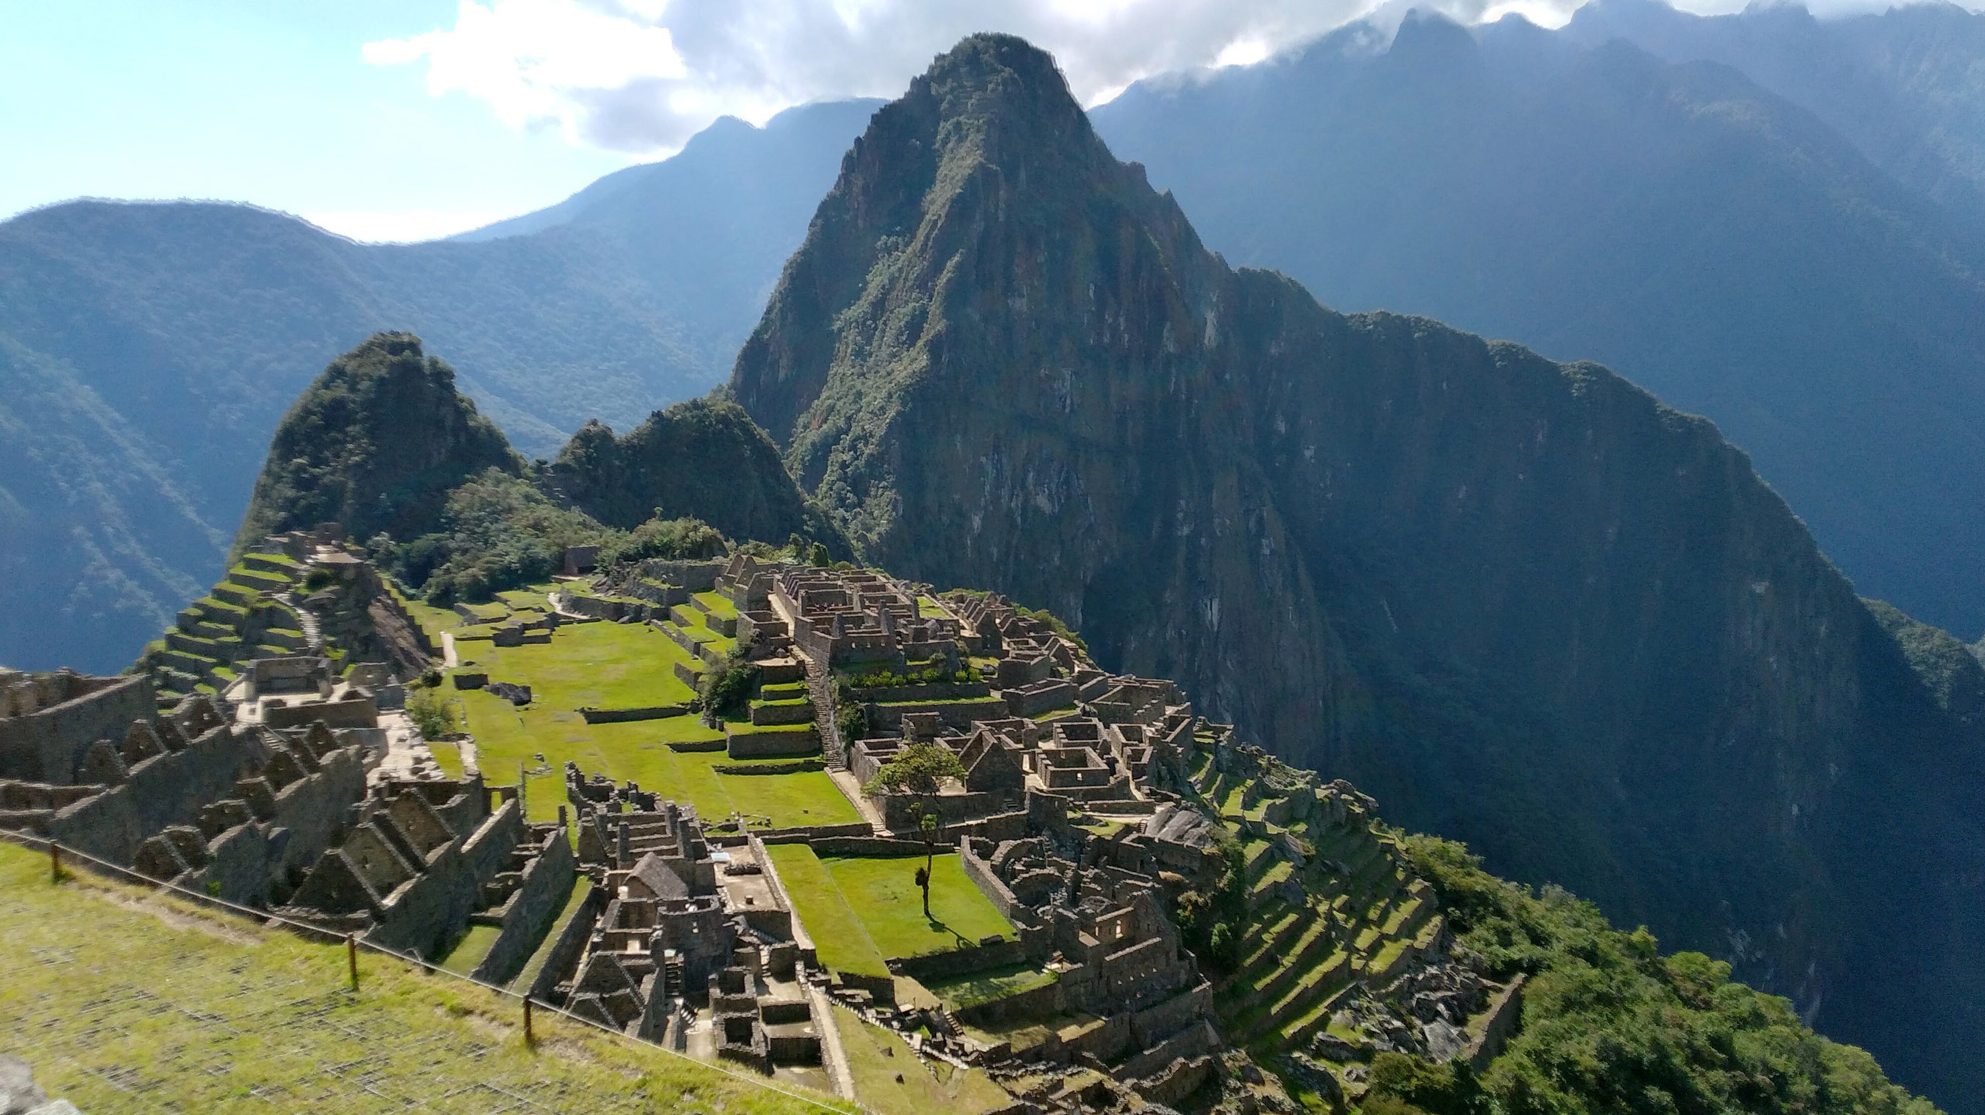 Machu Picchu reopens its gates for tourist visits starting March 1st